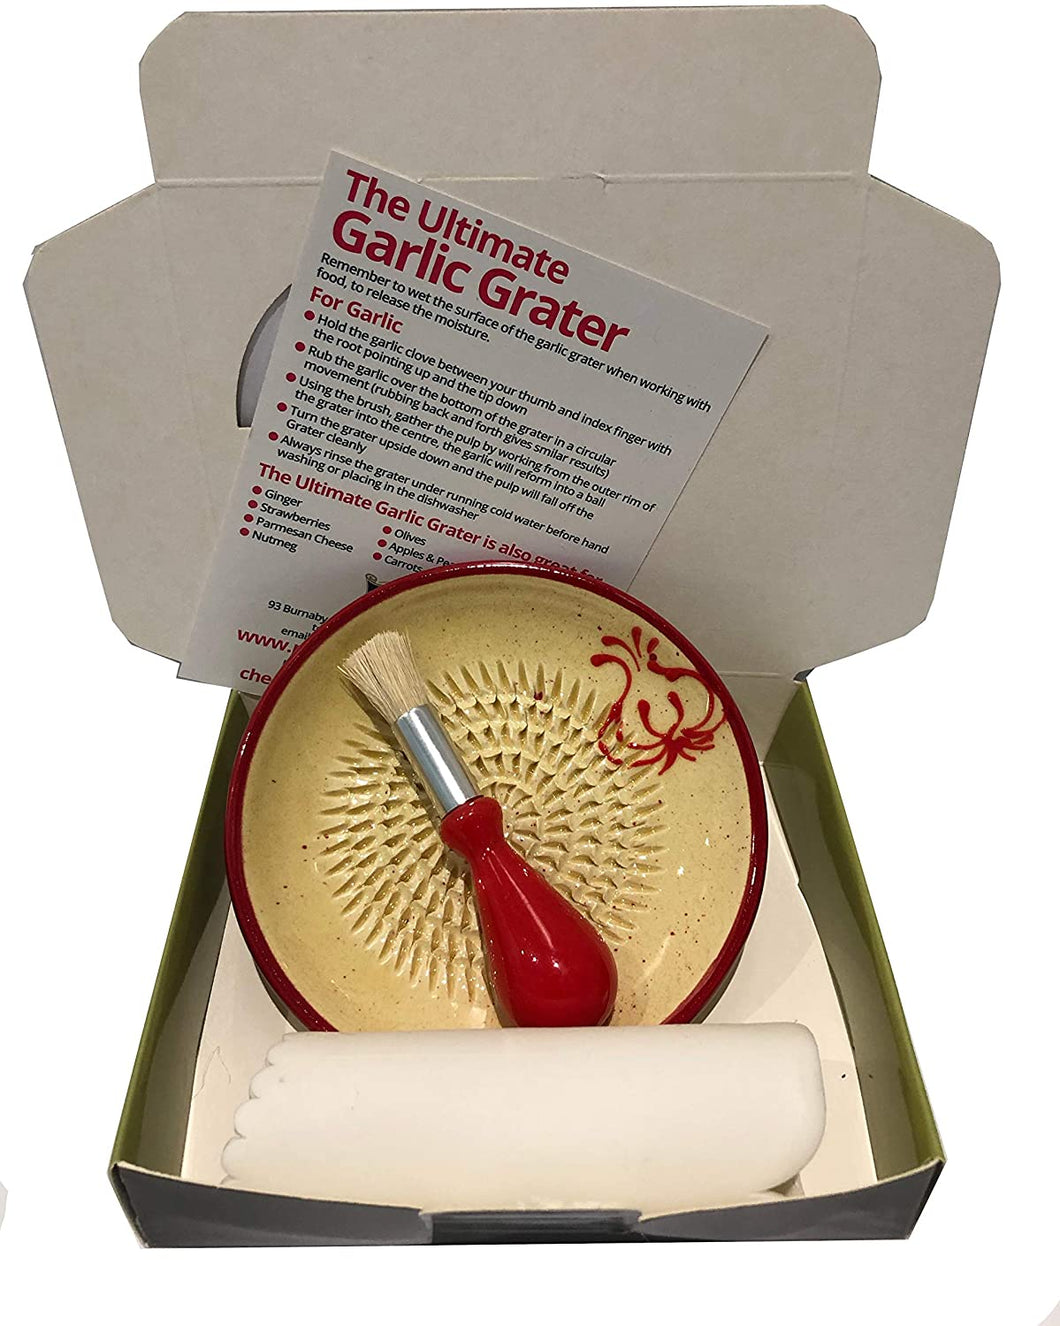 Red Garlic Design (3) Garlic and Ginger Grater Set with Brush and Peeler. A Must for Every Foodie who Loves to Cook.